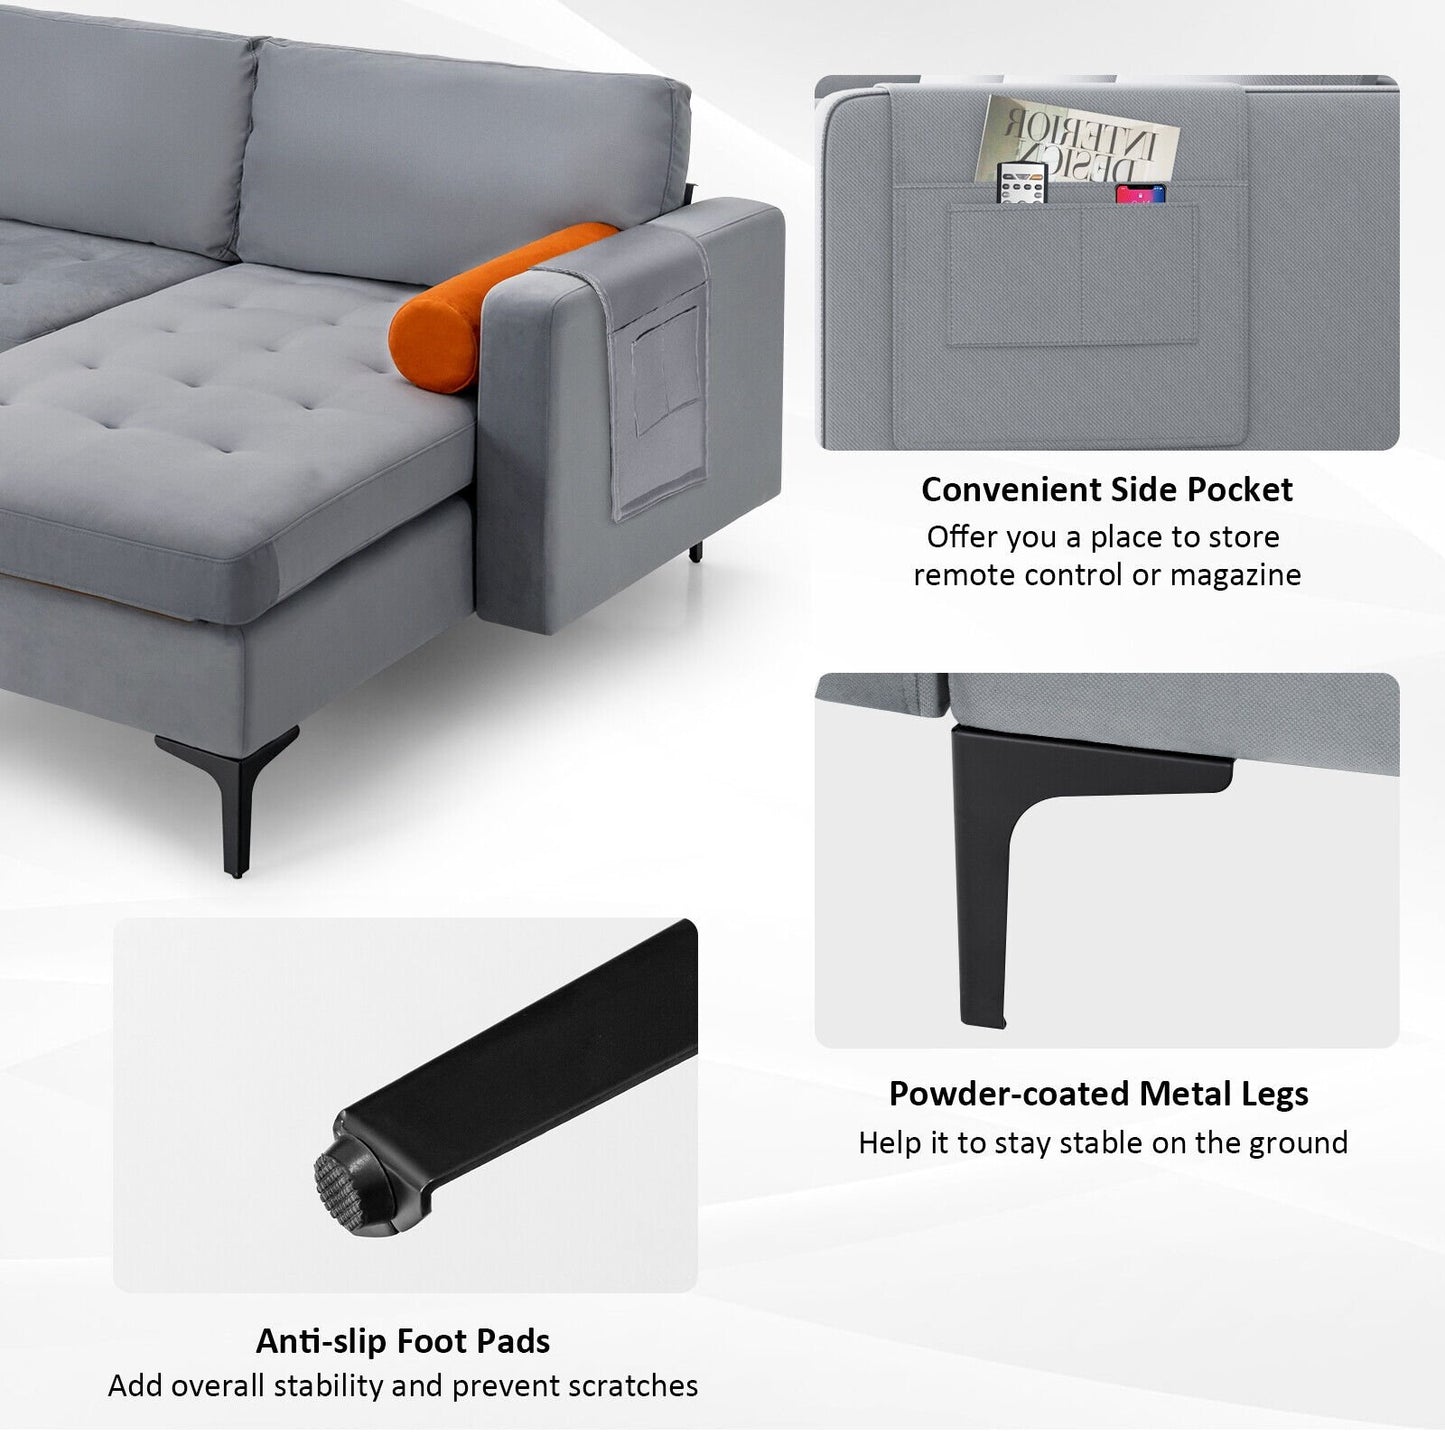 Modular L-shaped 3-Seat Sectional Sofa with Reversible Chaise and 2 USB Ports, Gray